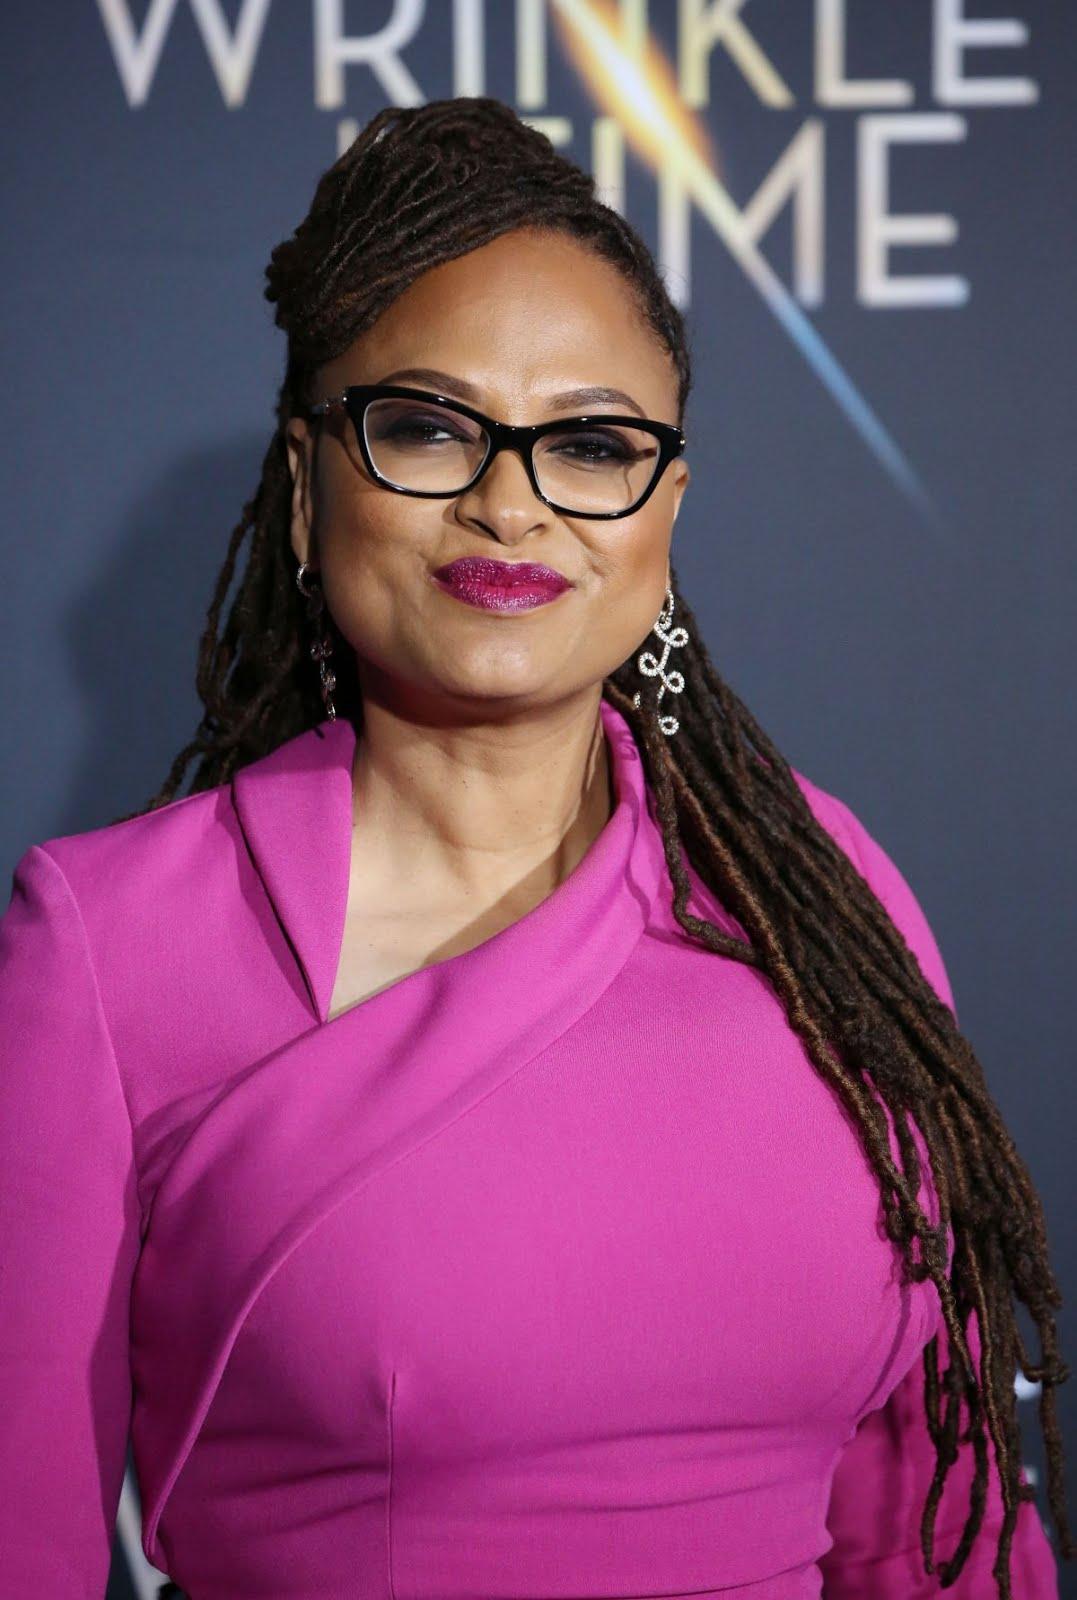 Ava Duvernay At A Wrinkle In Time Premiere In Los Angeles